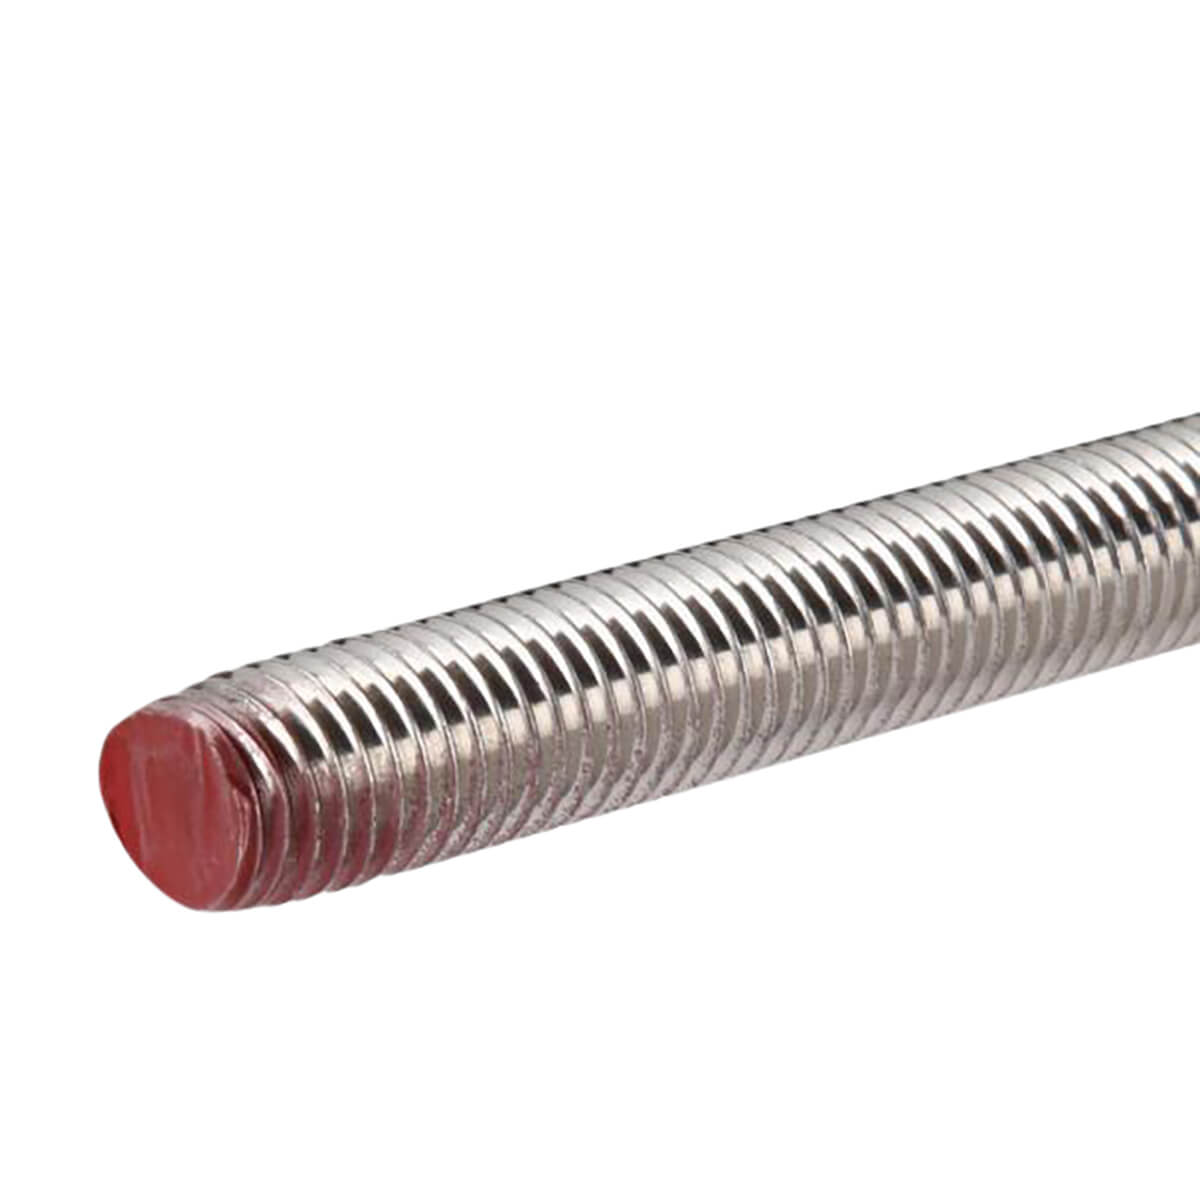 Threaded Rod - Red Tip - 5/8-in-11 - 72-in